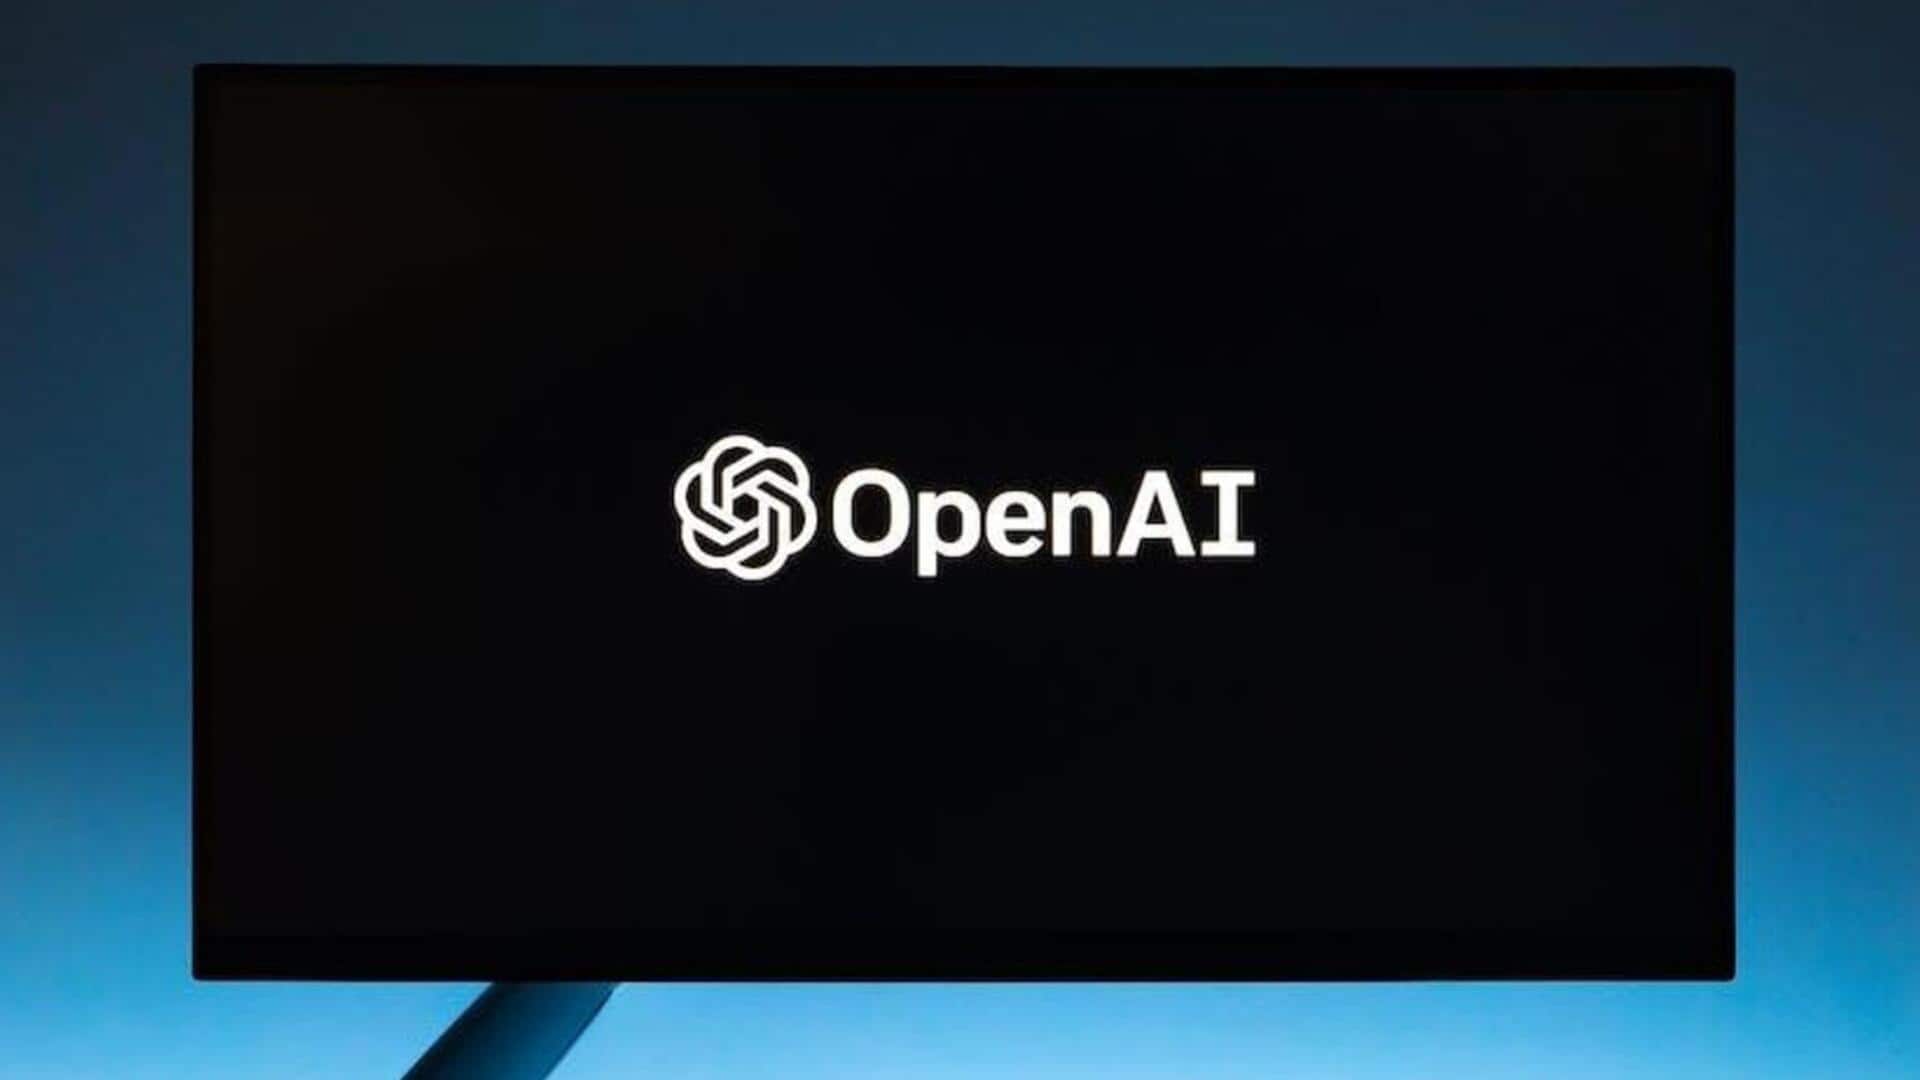 George RR Martin, other authors are suing OpenAI: Here's why